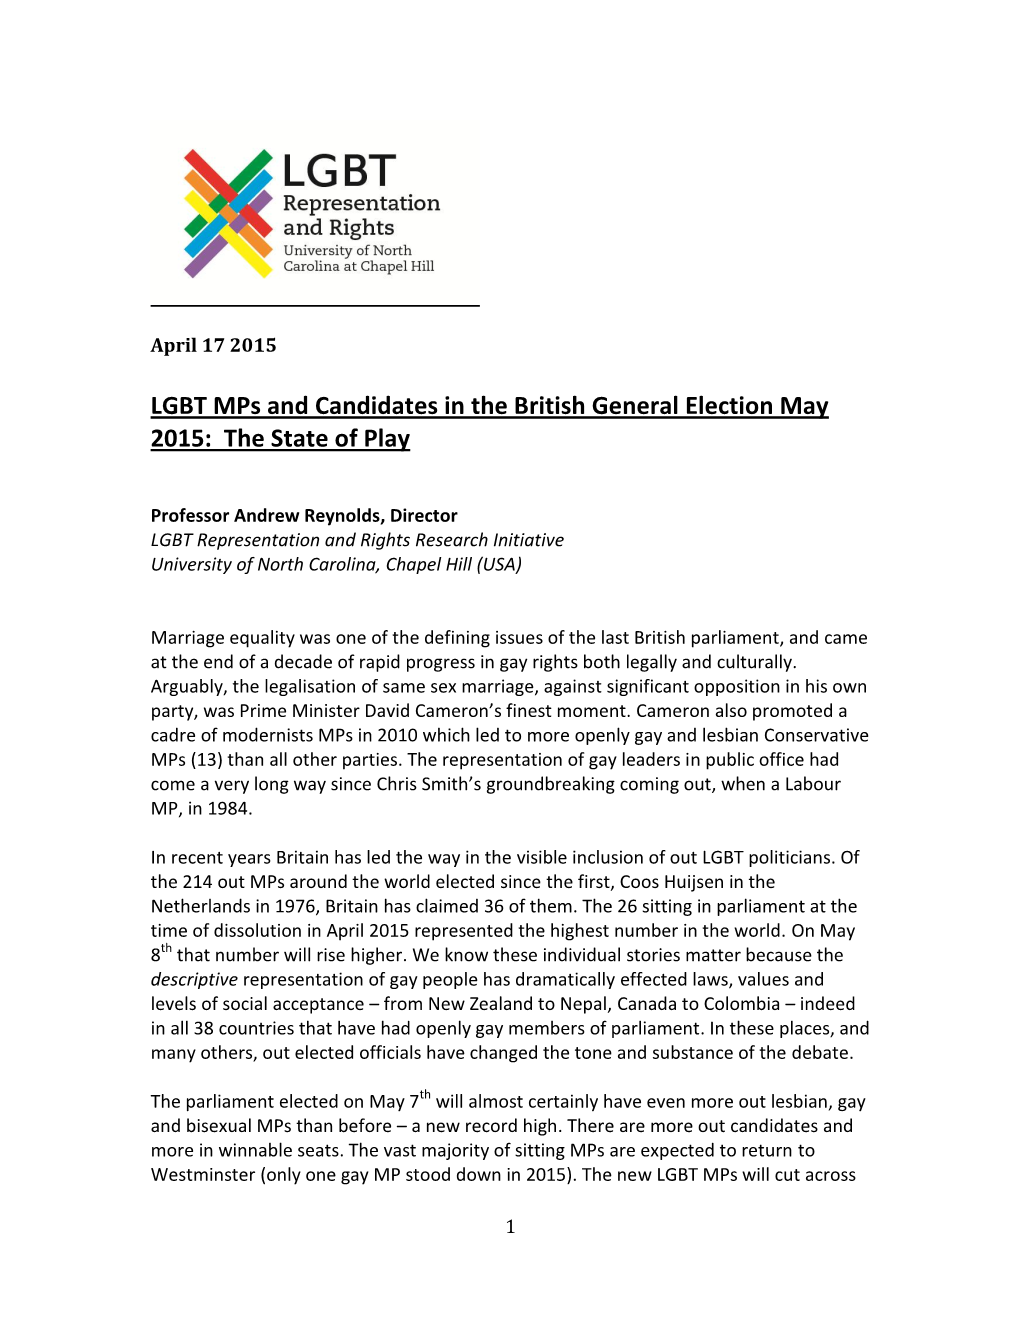 LGBT Mps and Candidates in the British General Election May 2015: the State of Play